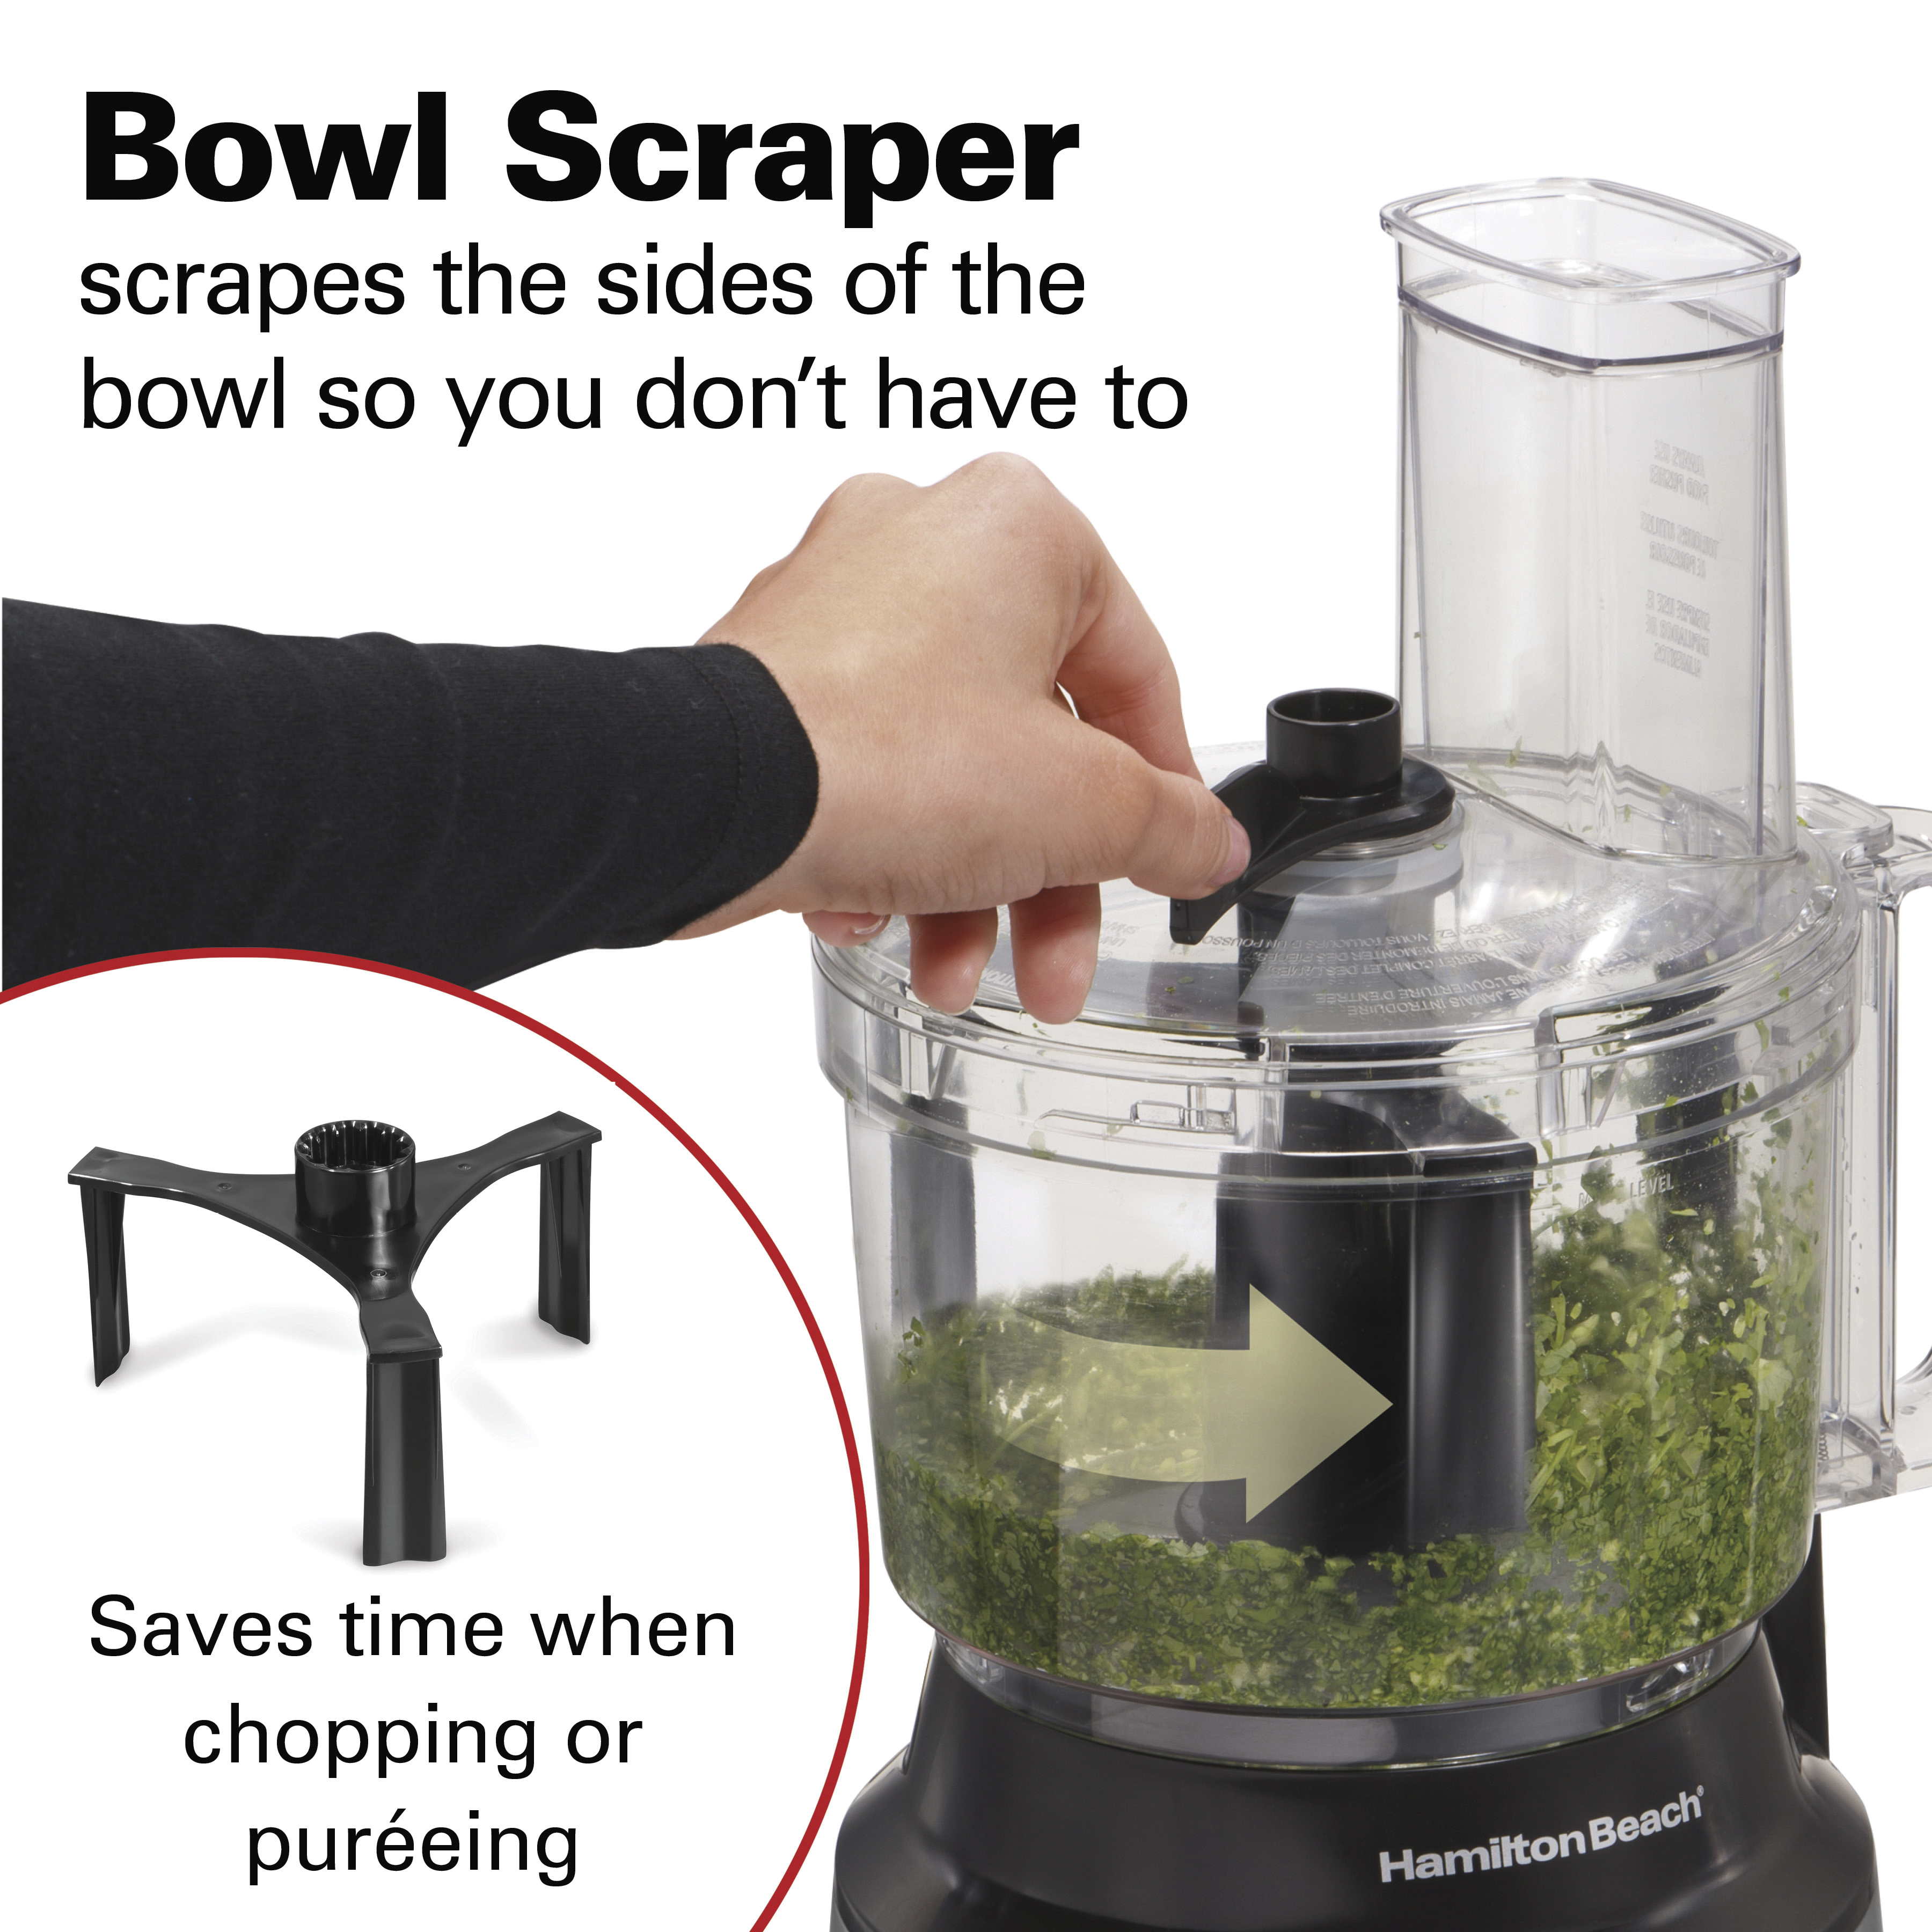 Hamilton Beach Food Processor and Vegetable Chopper with Easy Clean Bowl Scraper, 10 Cup Capacity, Stainless Steel, 70730 - image 3 of 9